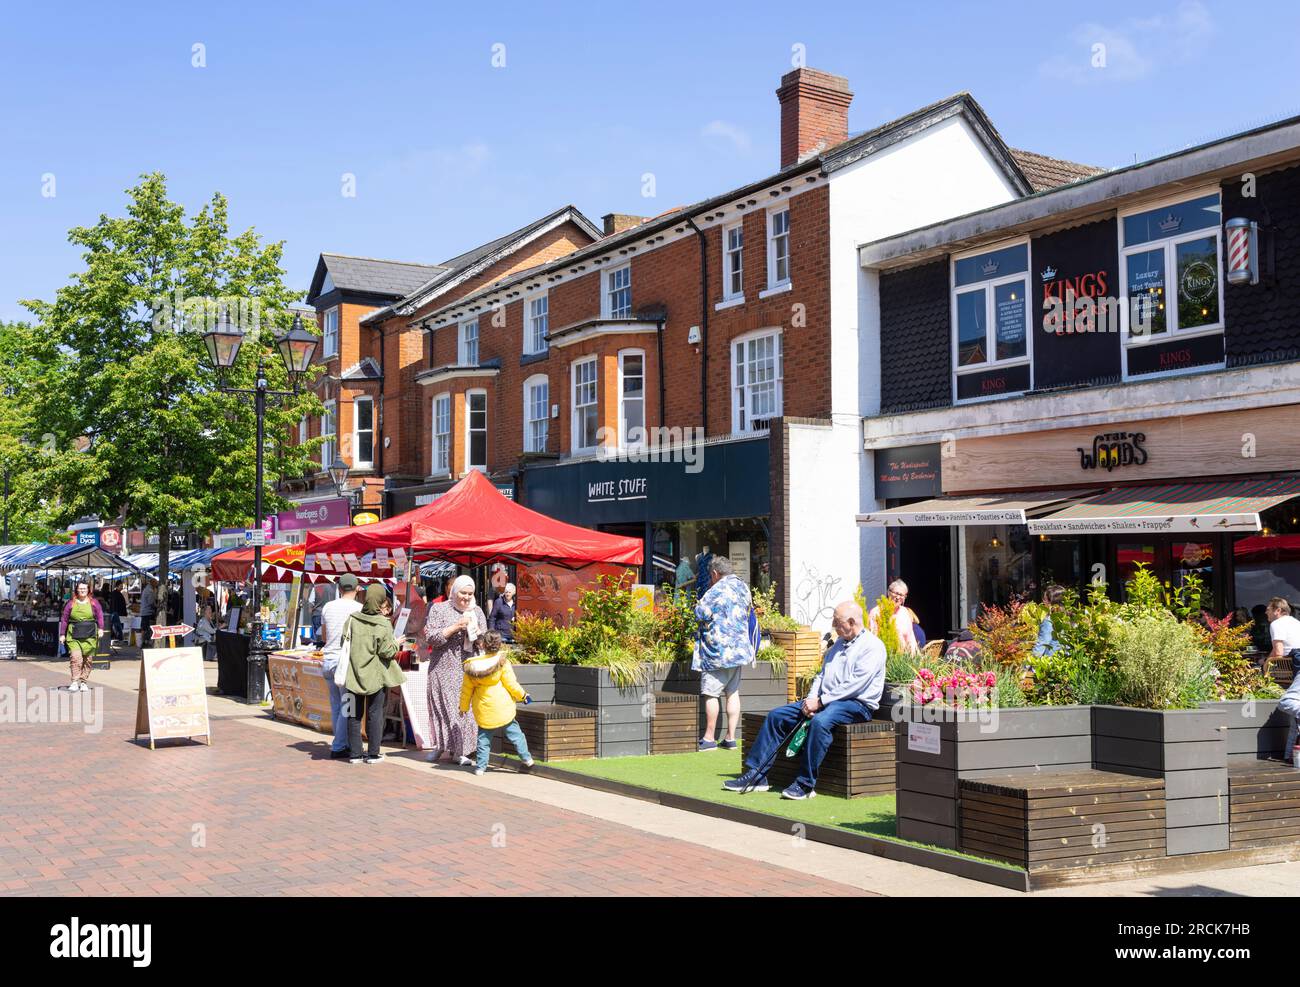 Solihull town centre open air market and shops on the high street in Solihull High street Solihull West Midlands England UK GB Europe Stock Photo